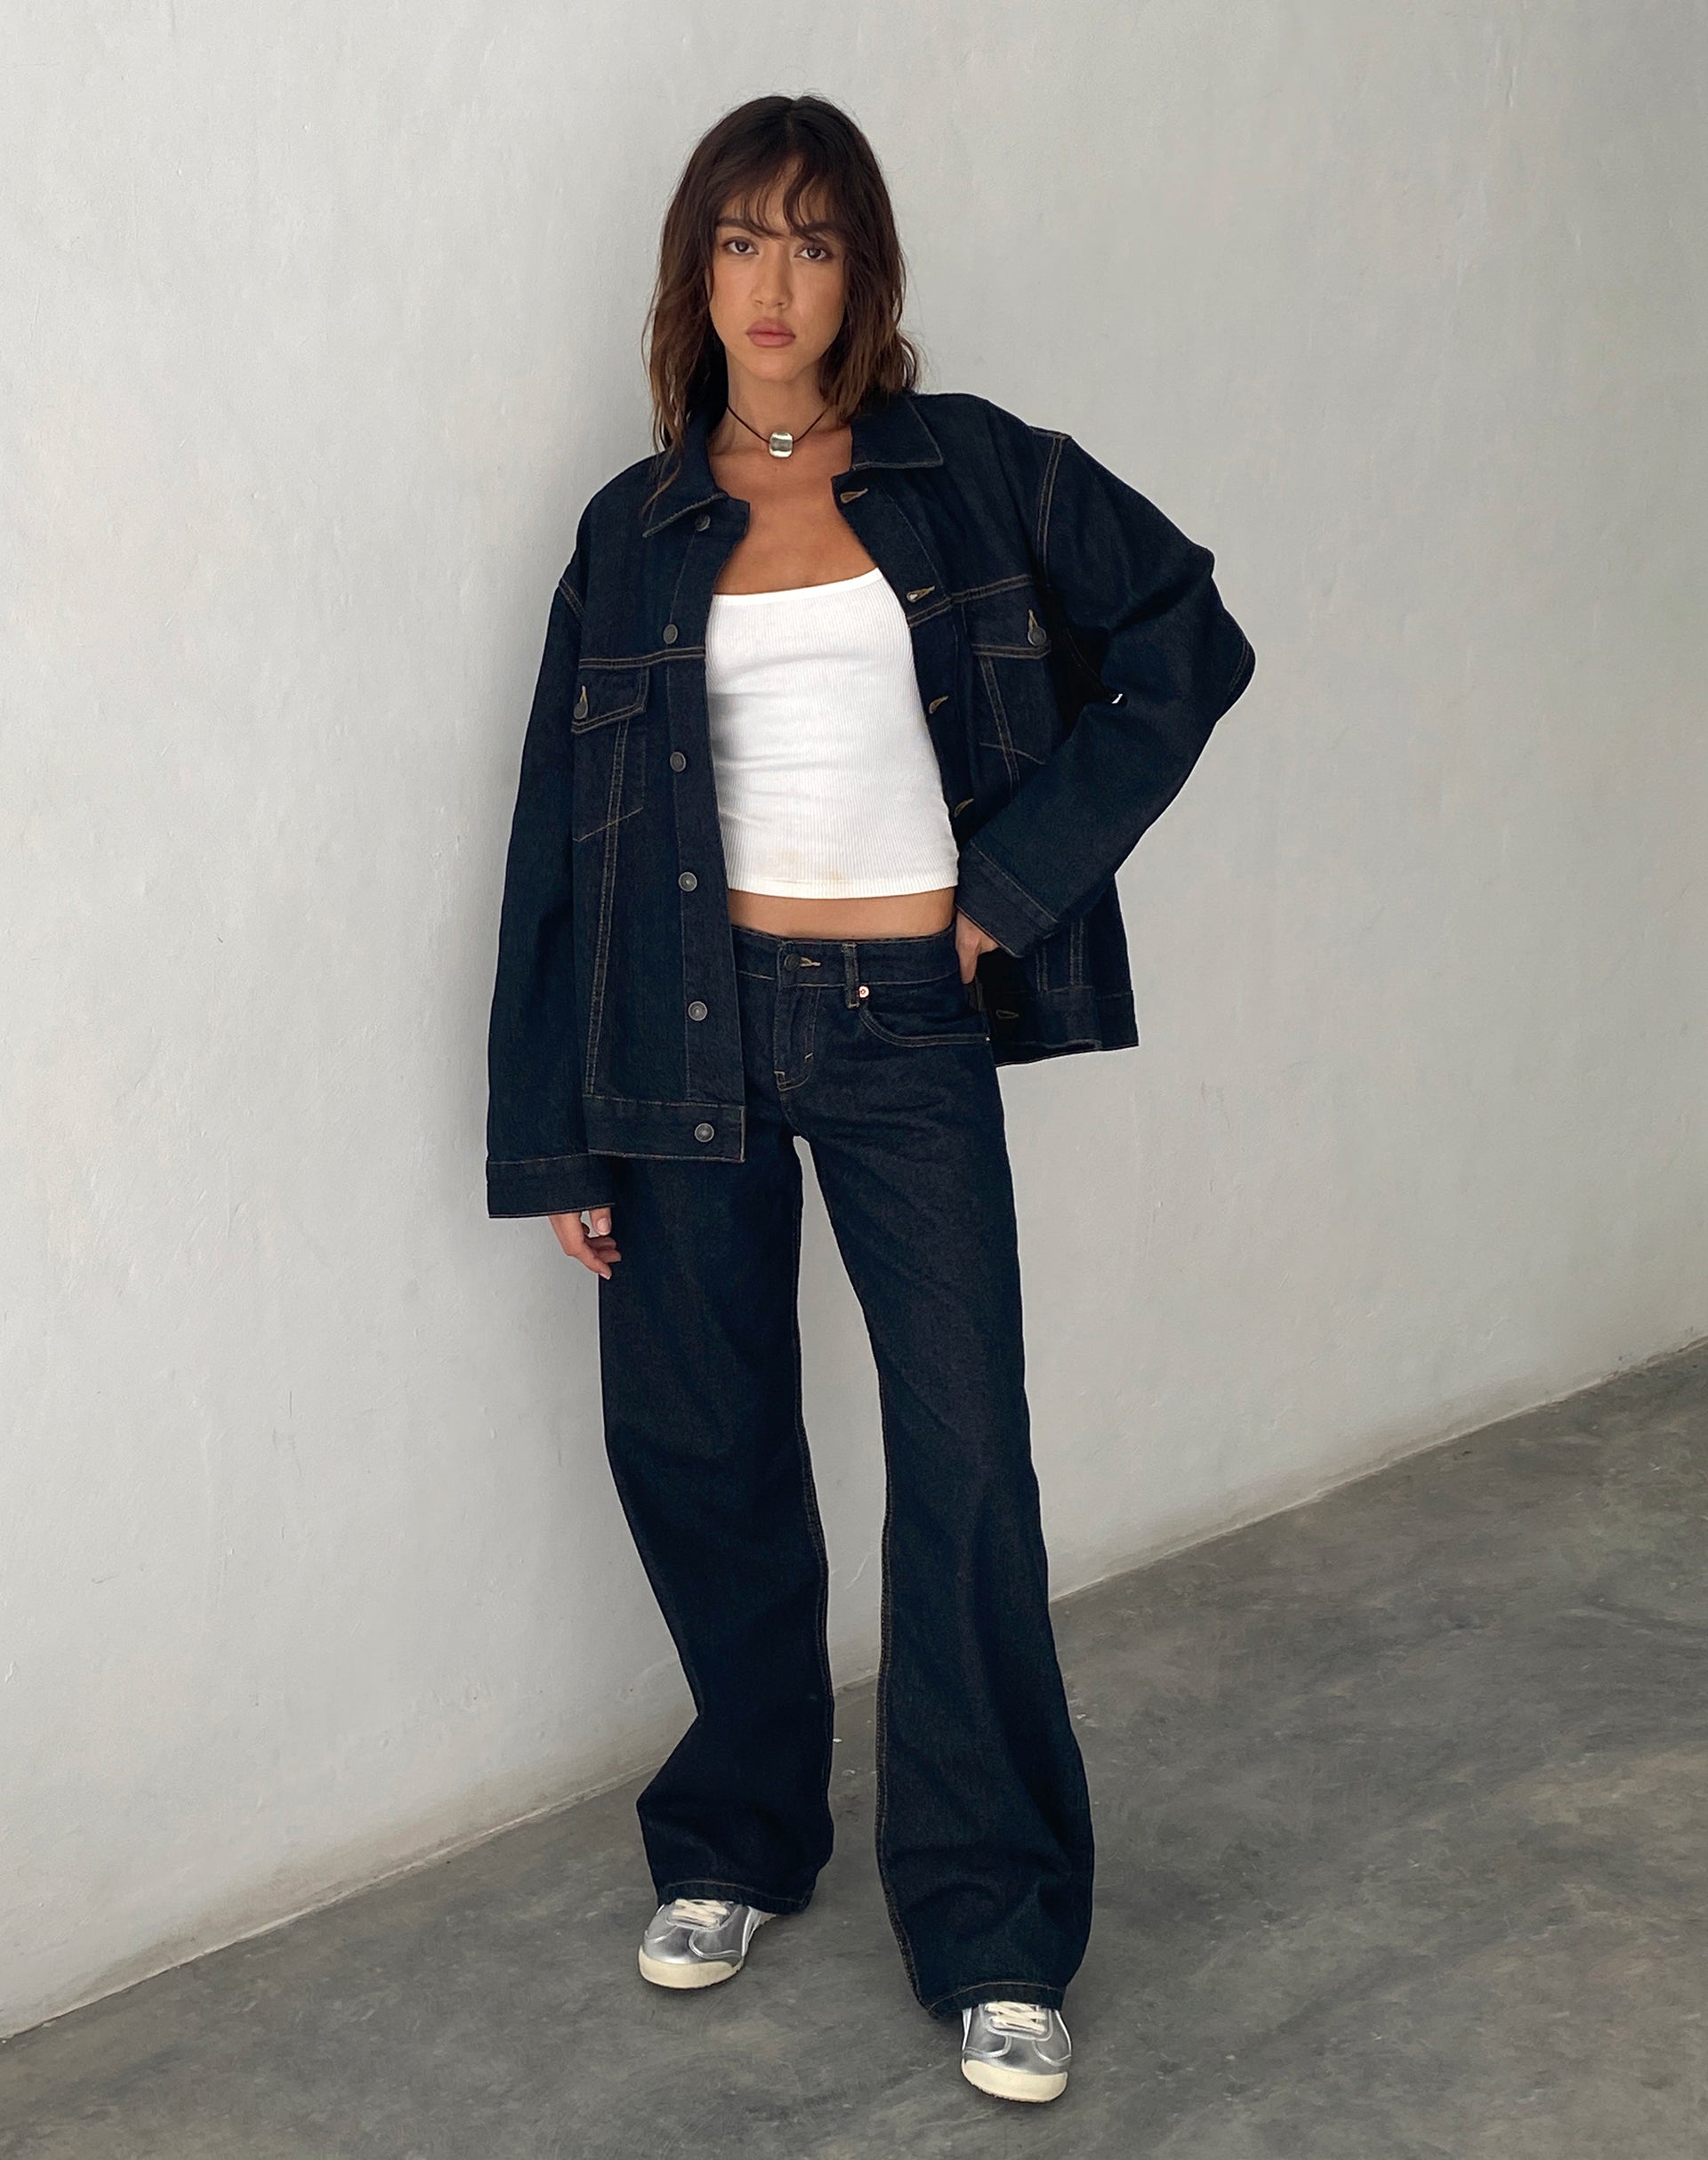 Low Rise Parallel Jeans in Indigo